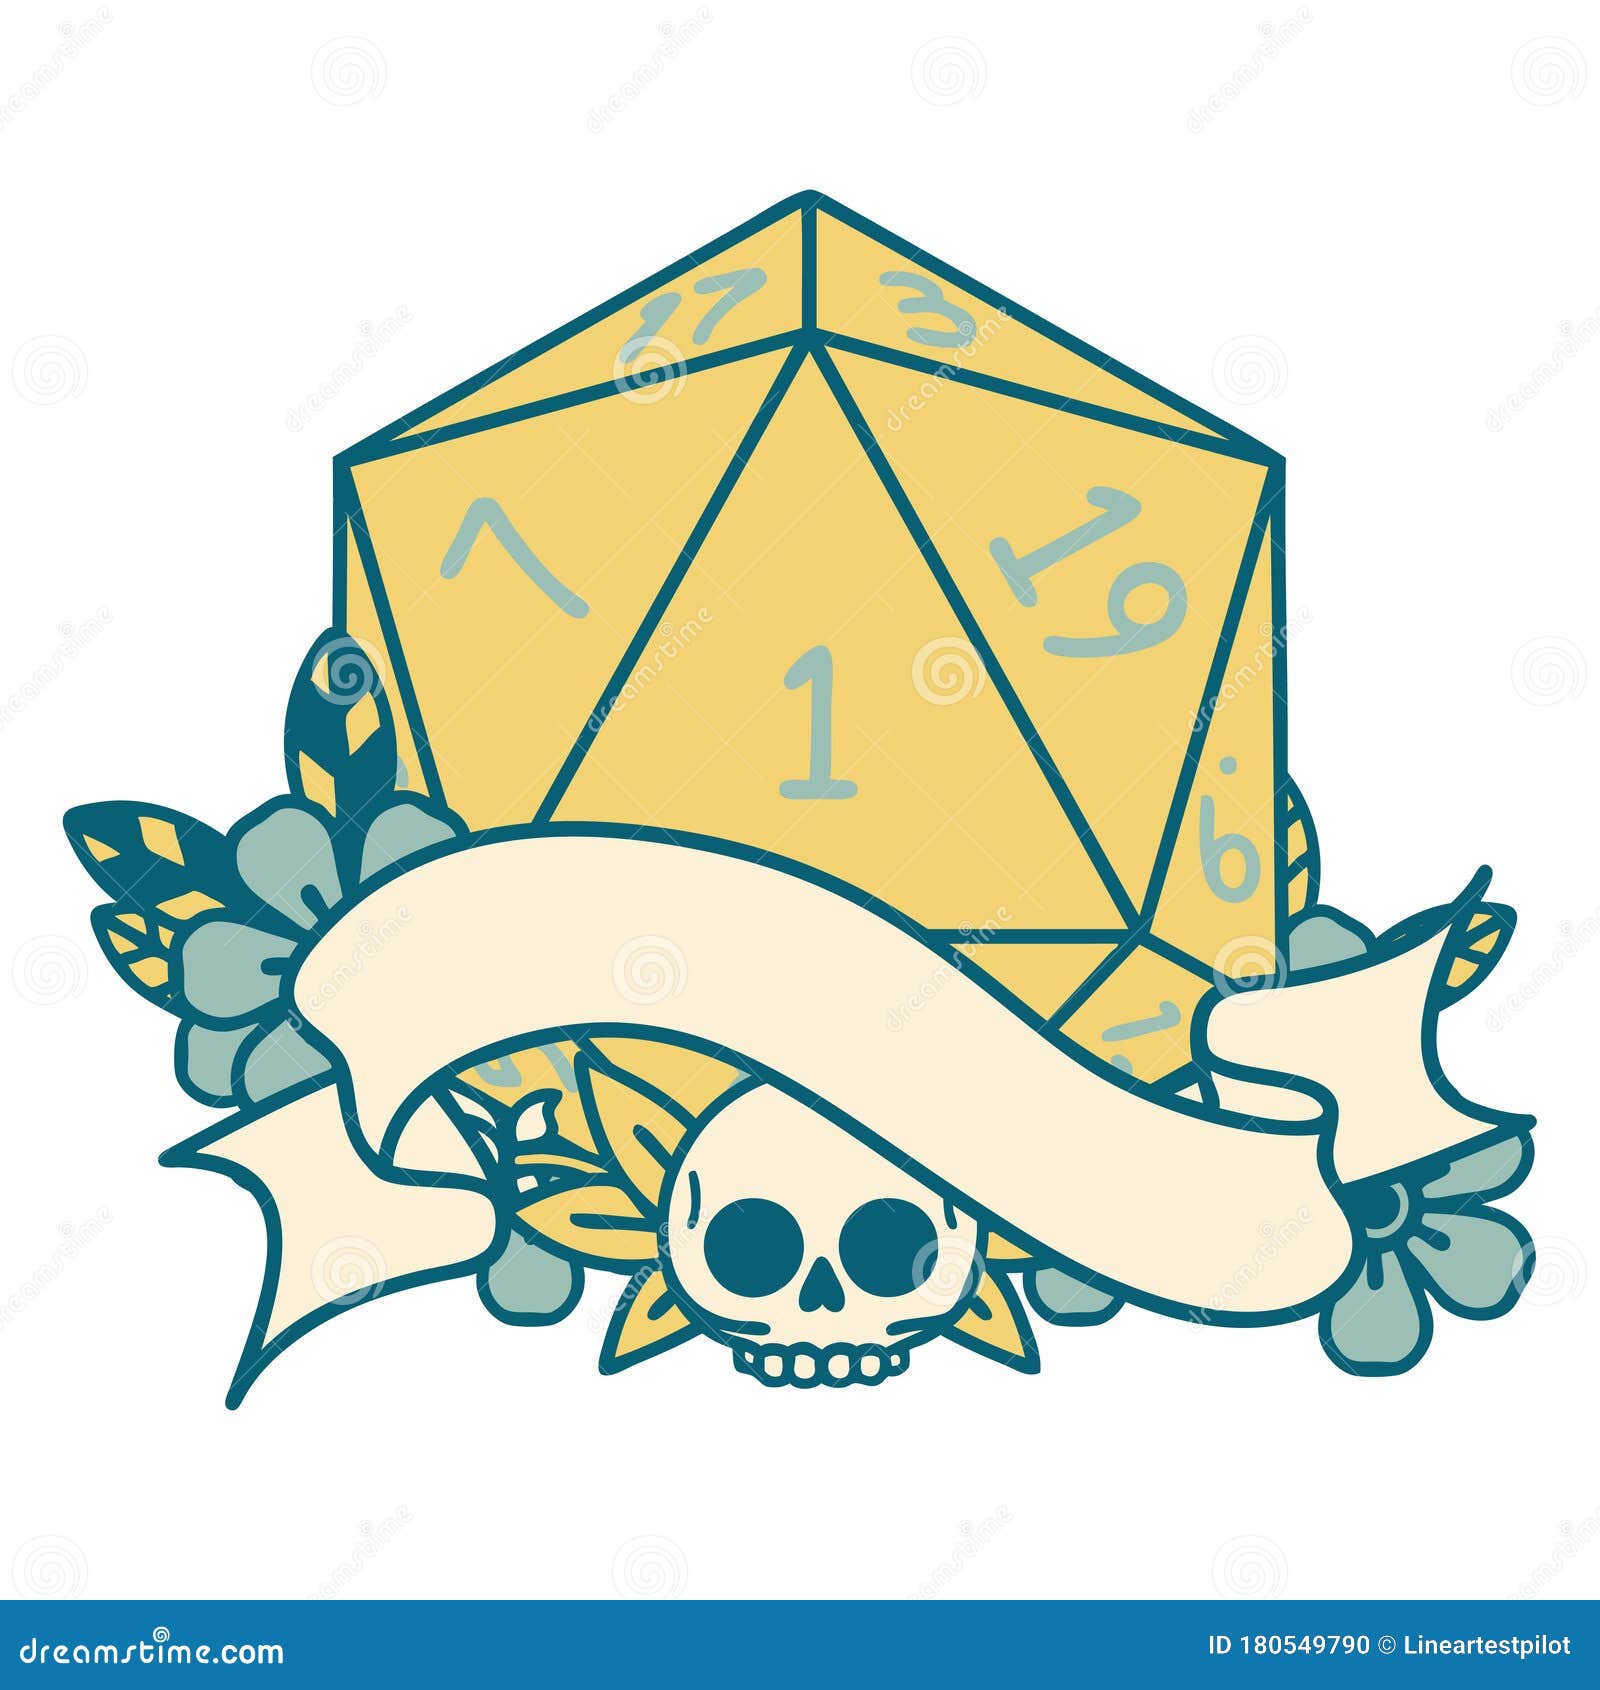 Natural One D20 Dice Roll Illustration Stock Vector - Illustration of ...